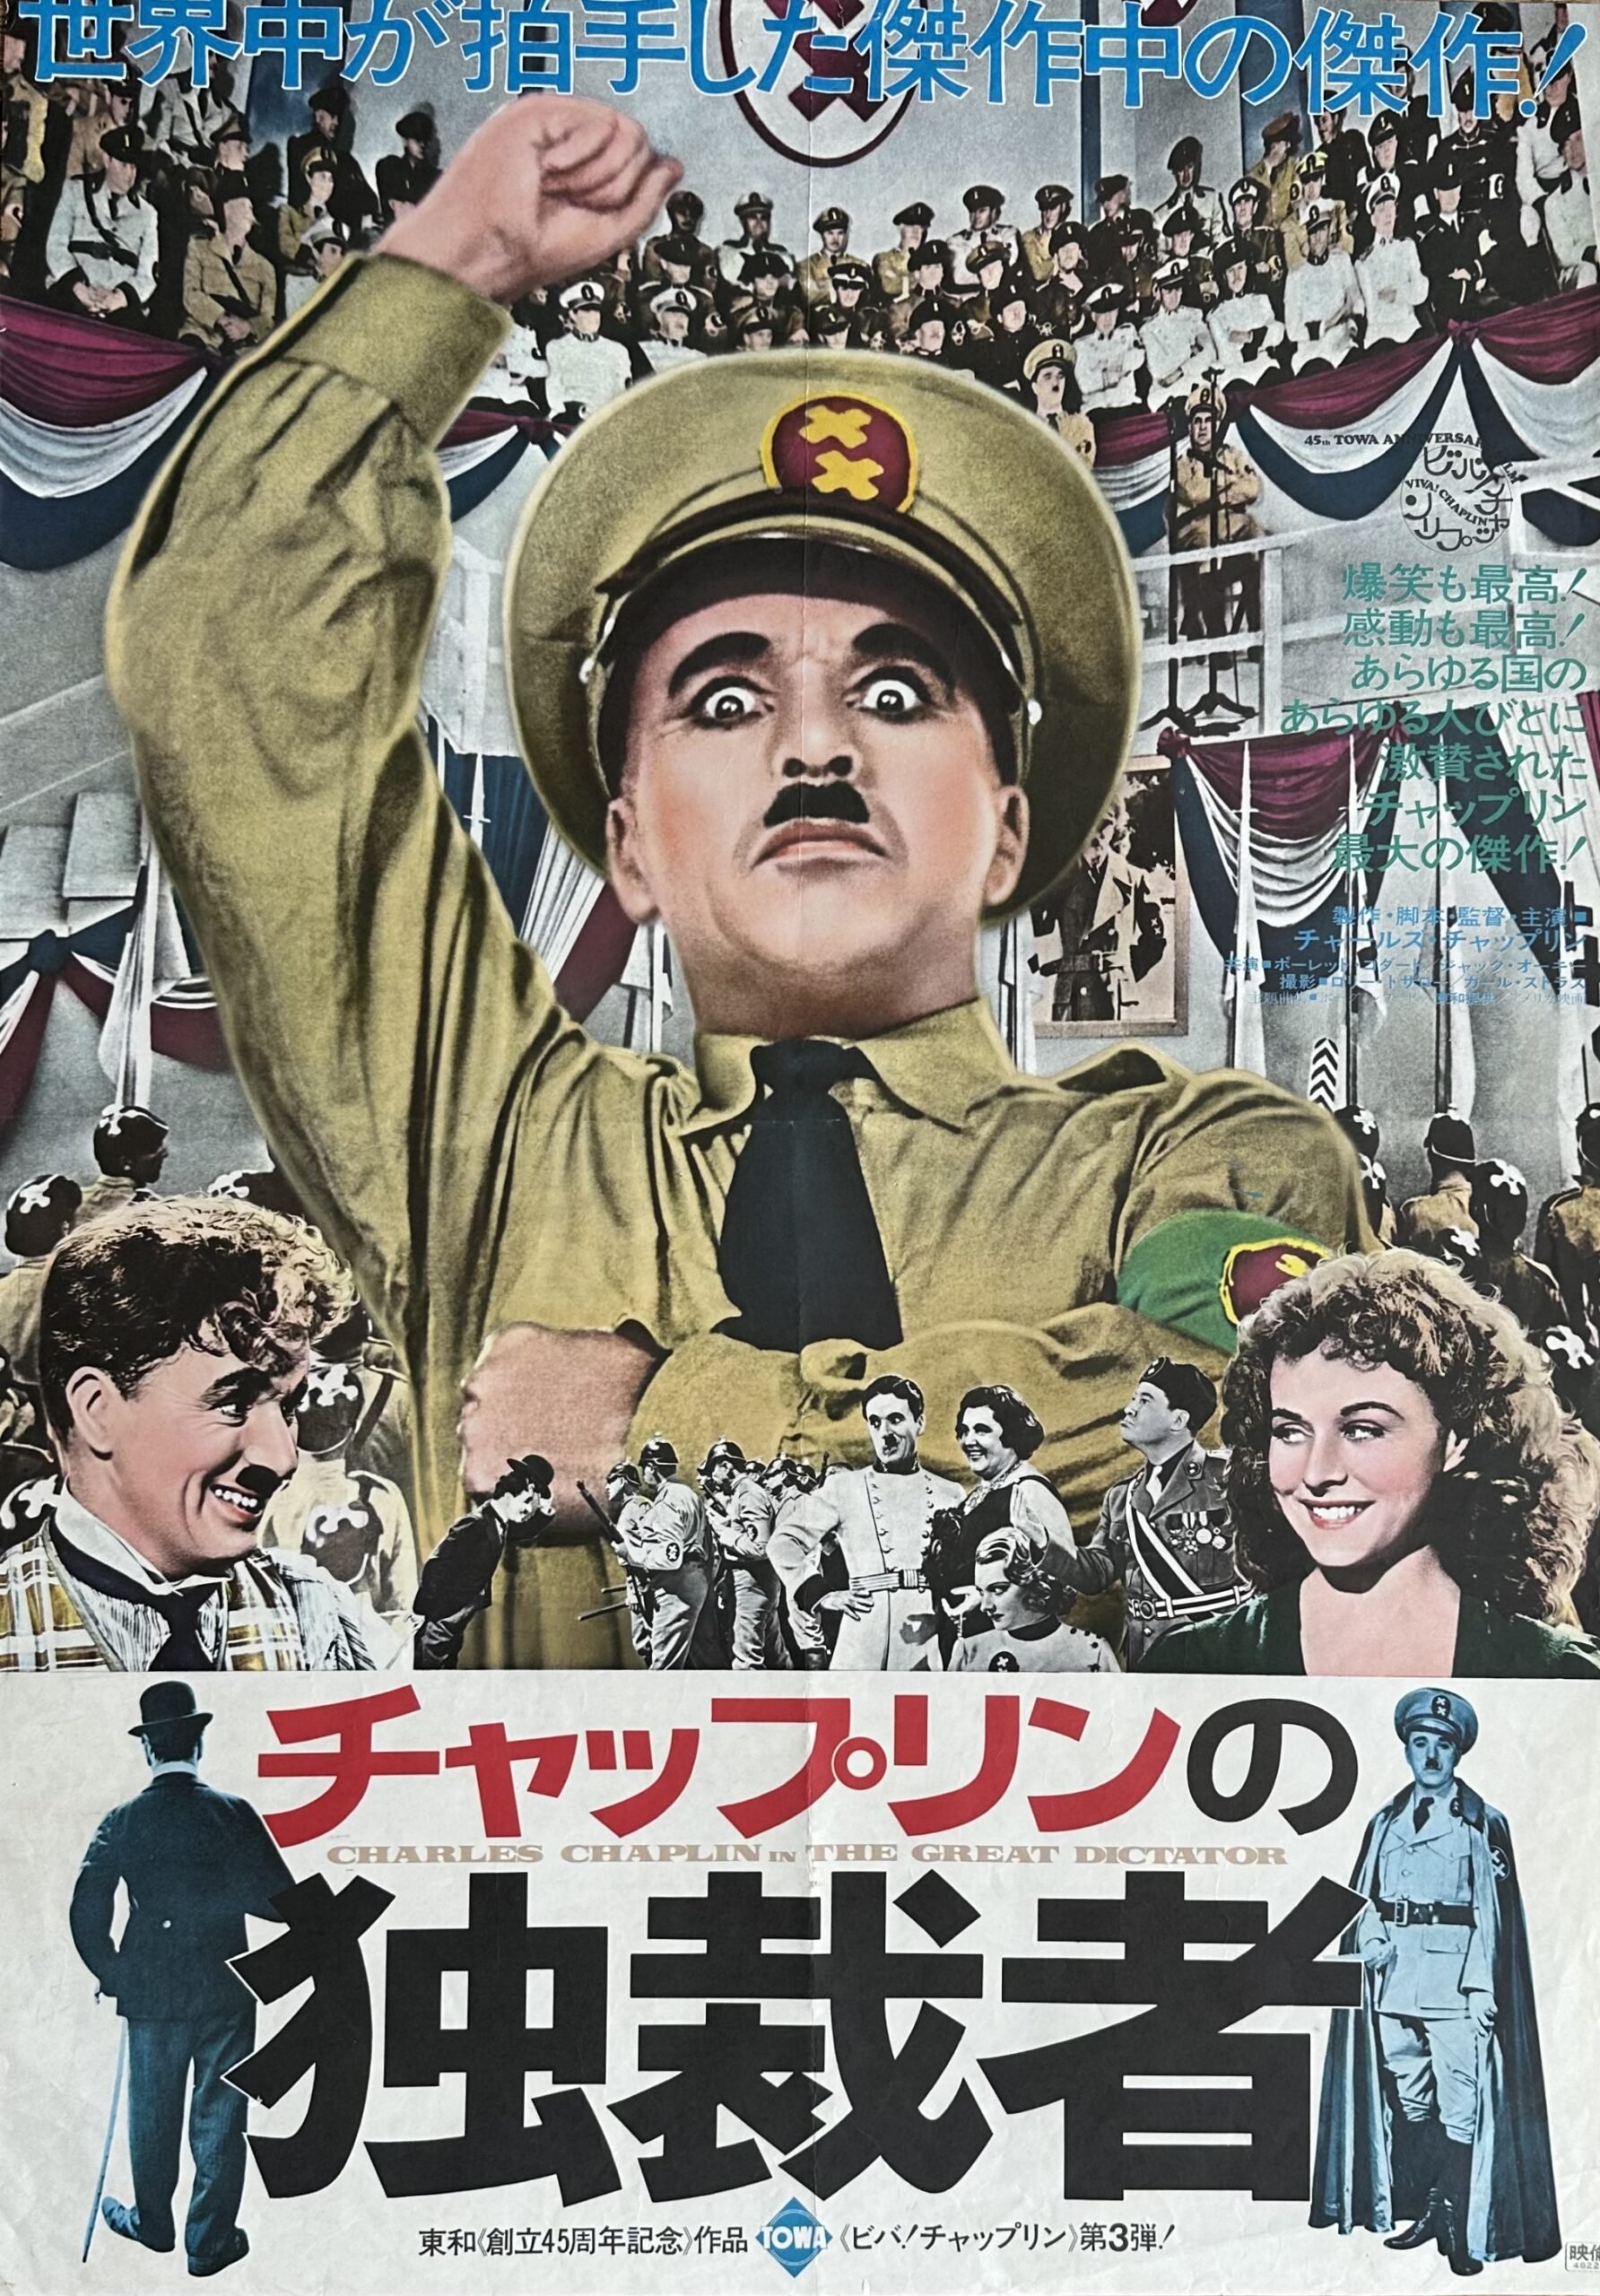 Original vintage Japanese movie poster for the Charlie Chaplin comedy, The Great Dictator